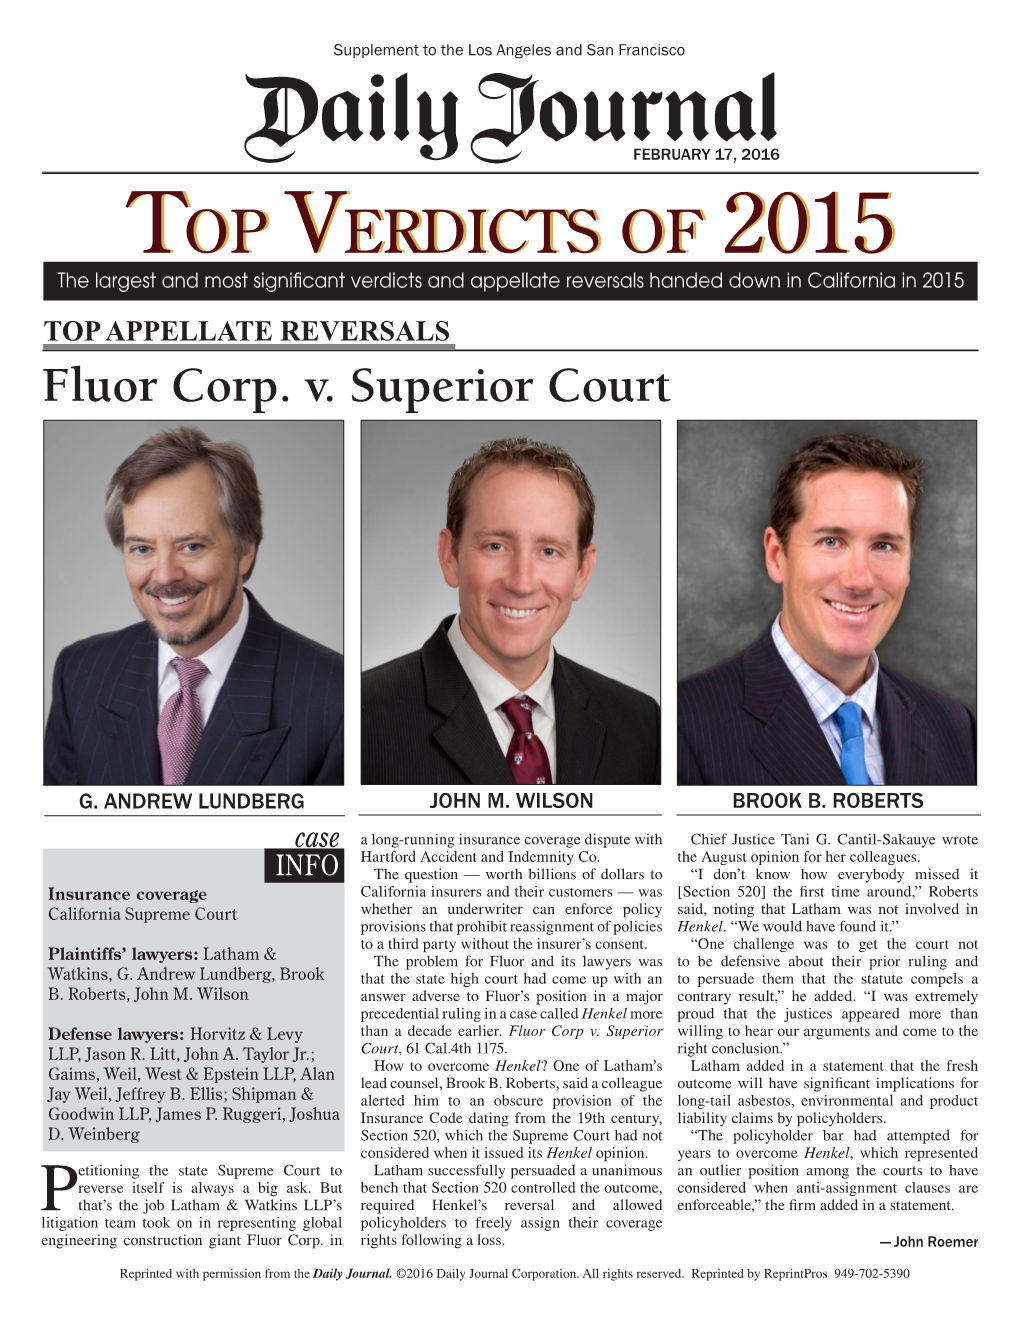 Top Appellate Reversals: Fluor Corp. V. Superior Court